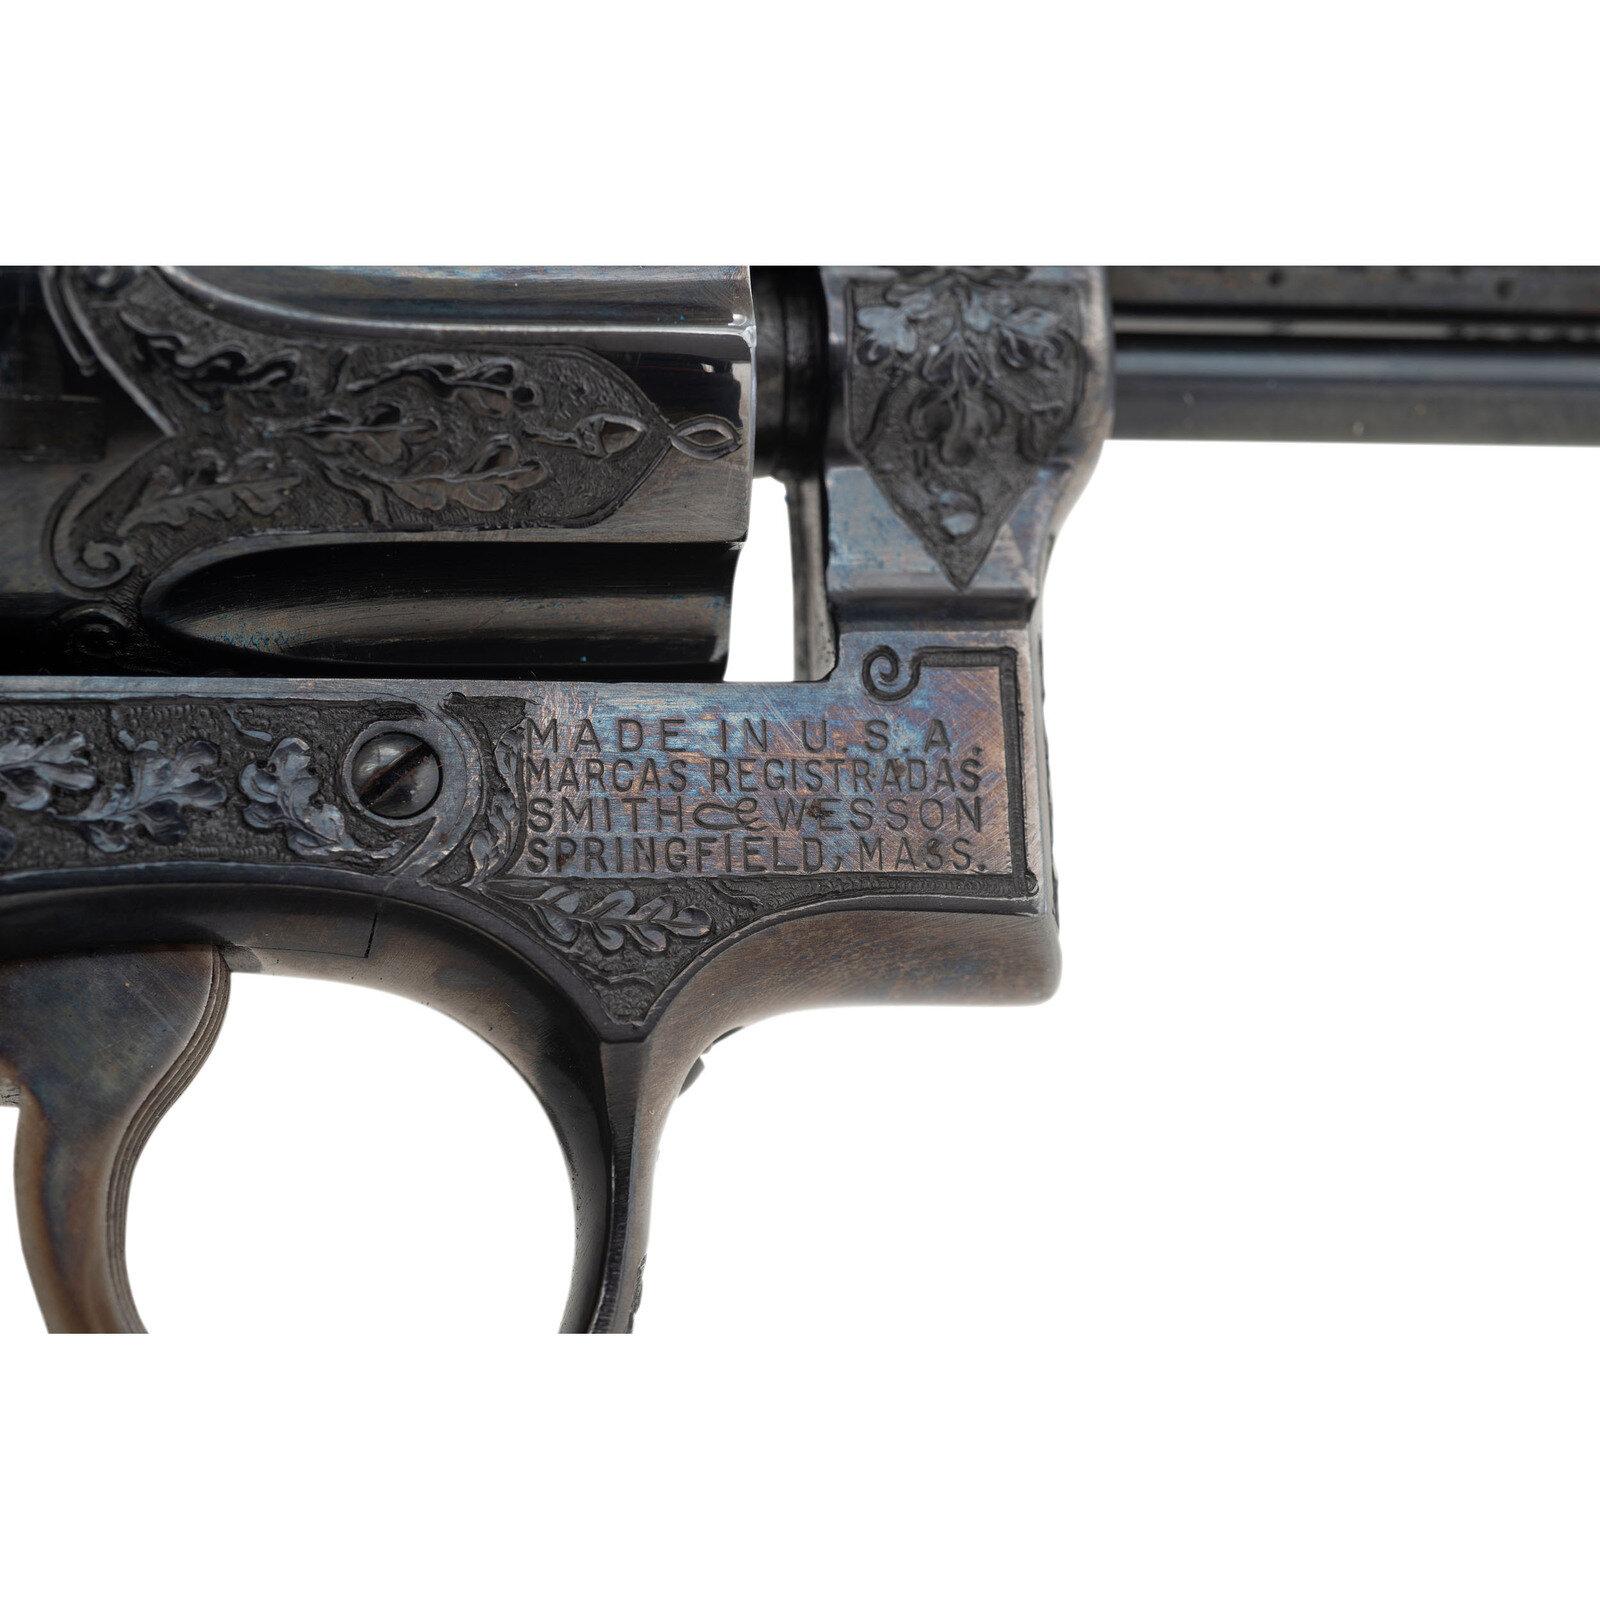 *Smith & Wesson K-38 Combat Masterpiece with German Style Deep Relief Engraving